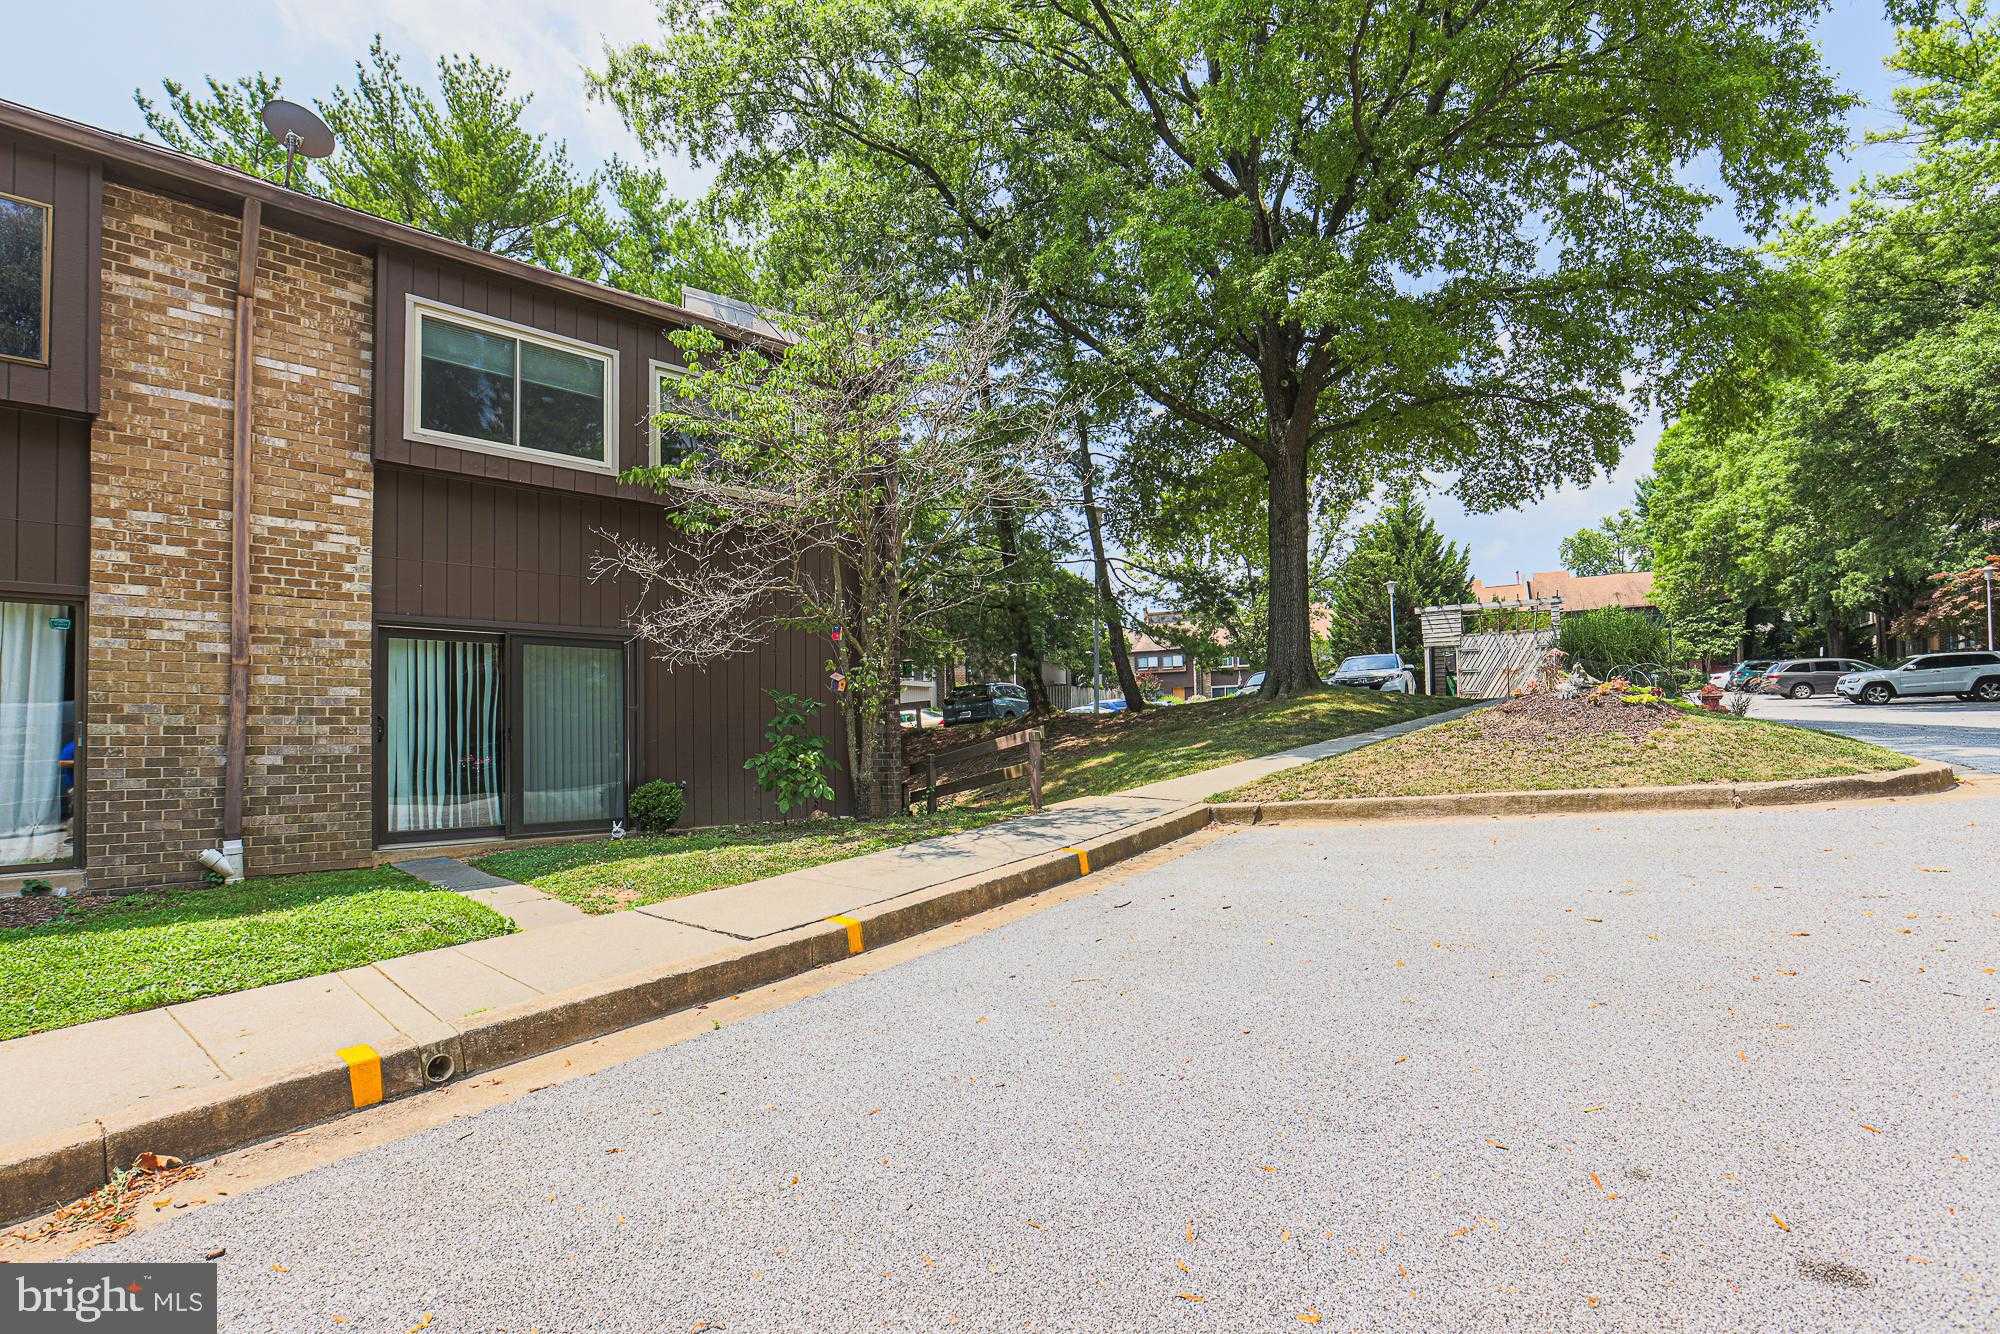 View BALTIMORE, MD 21209 townhome